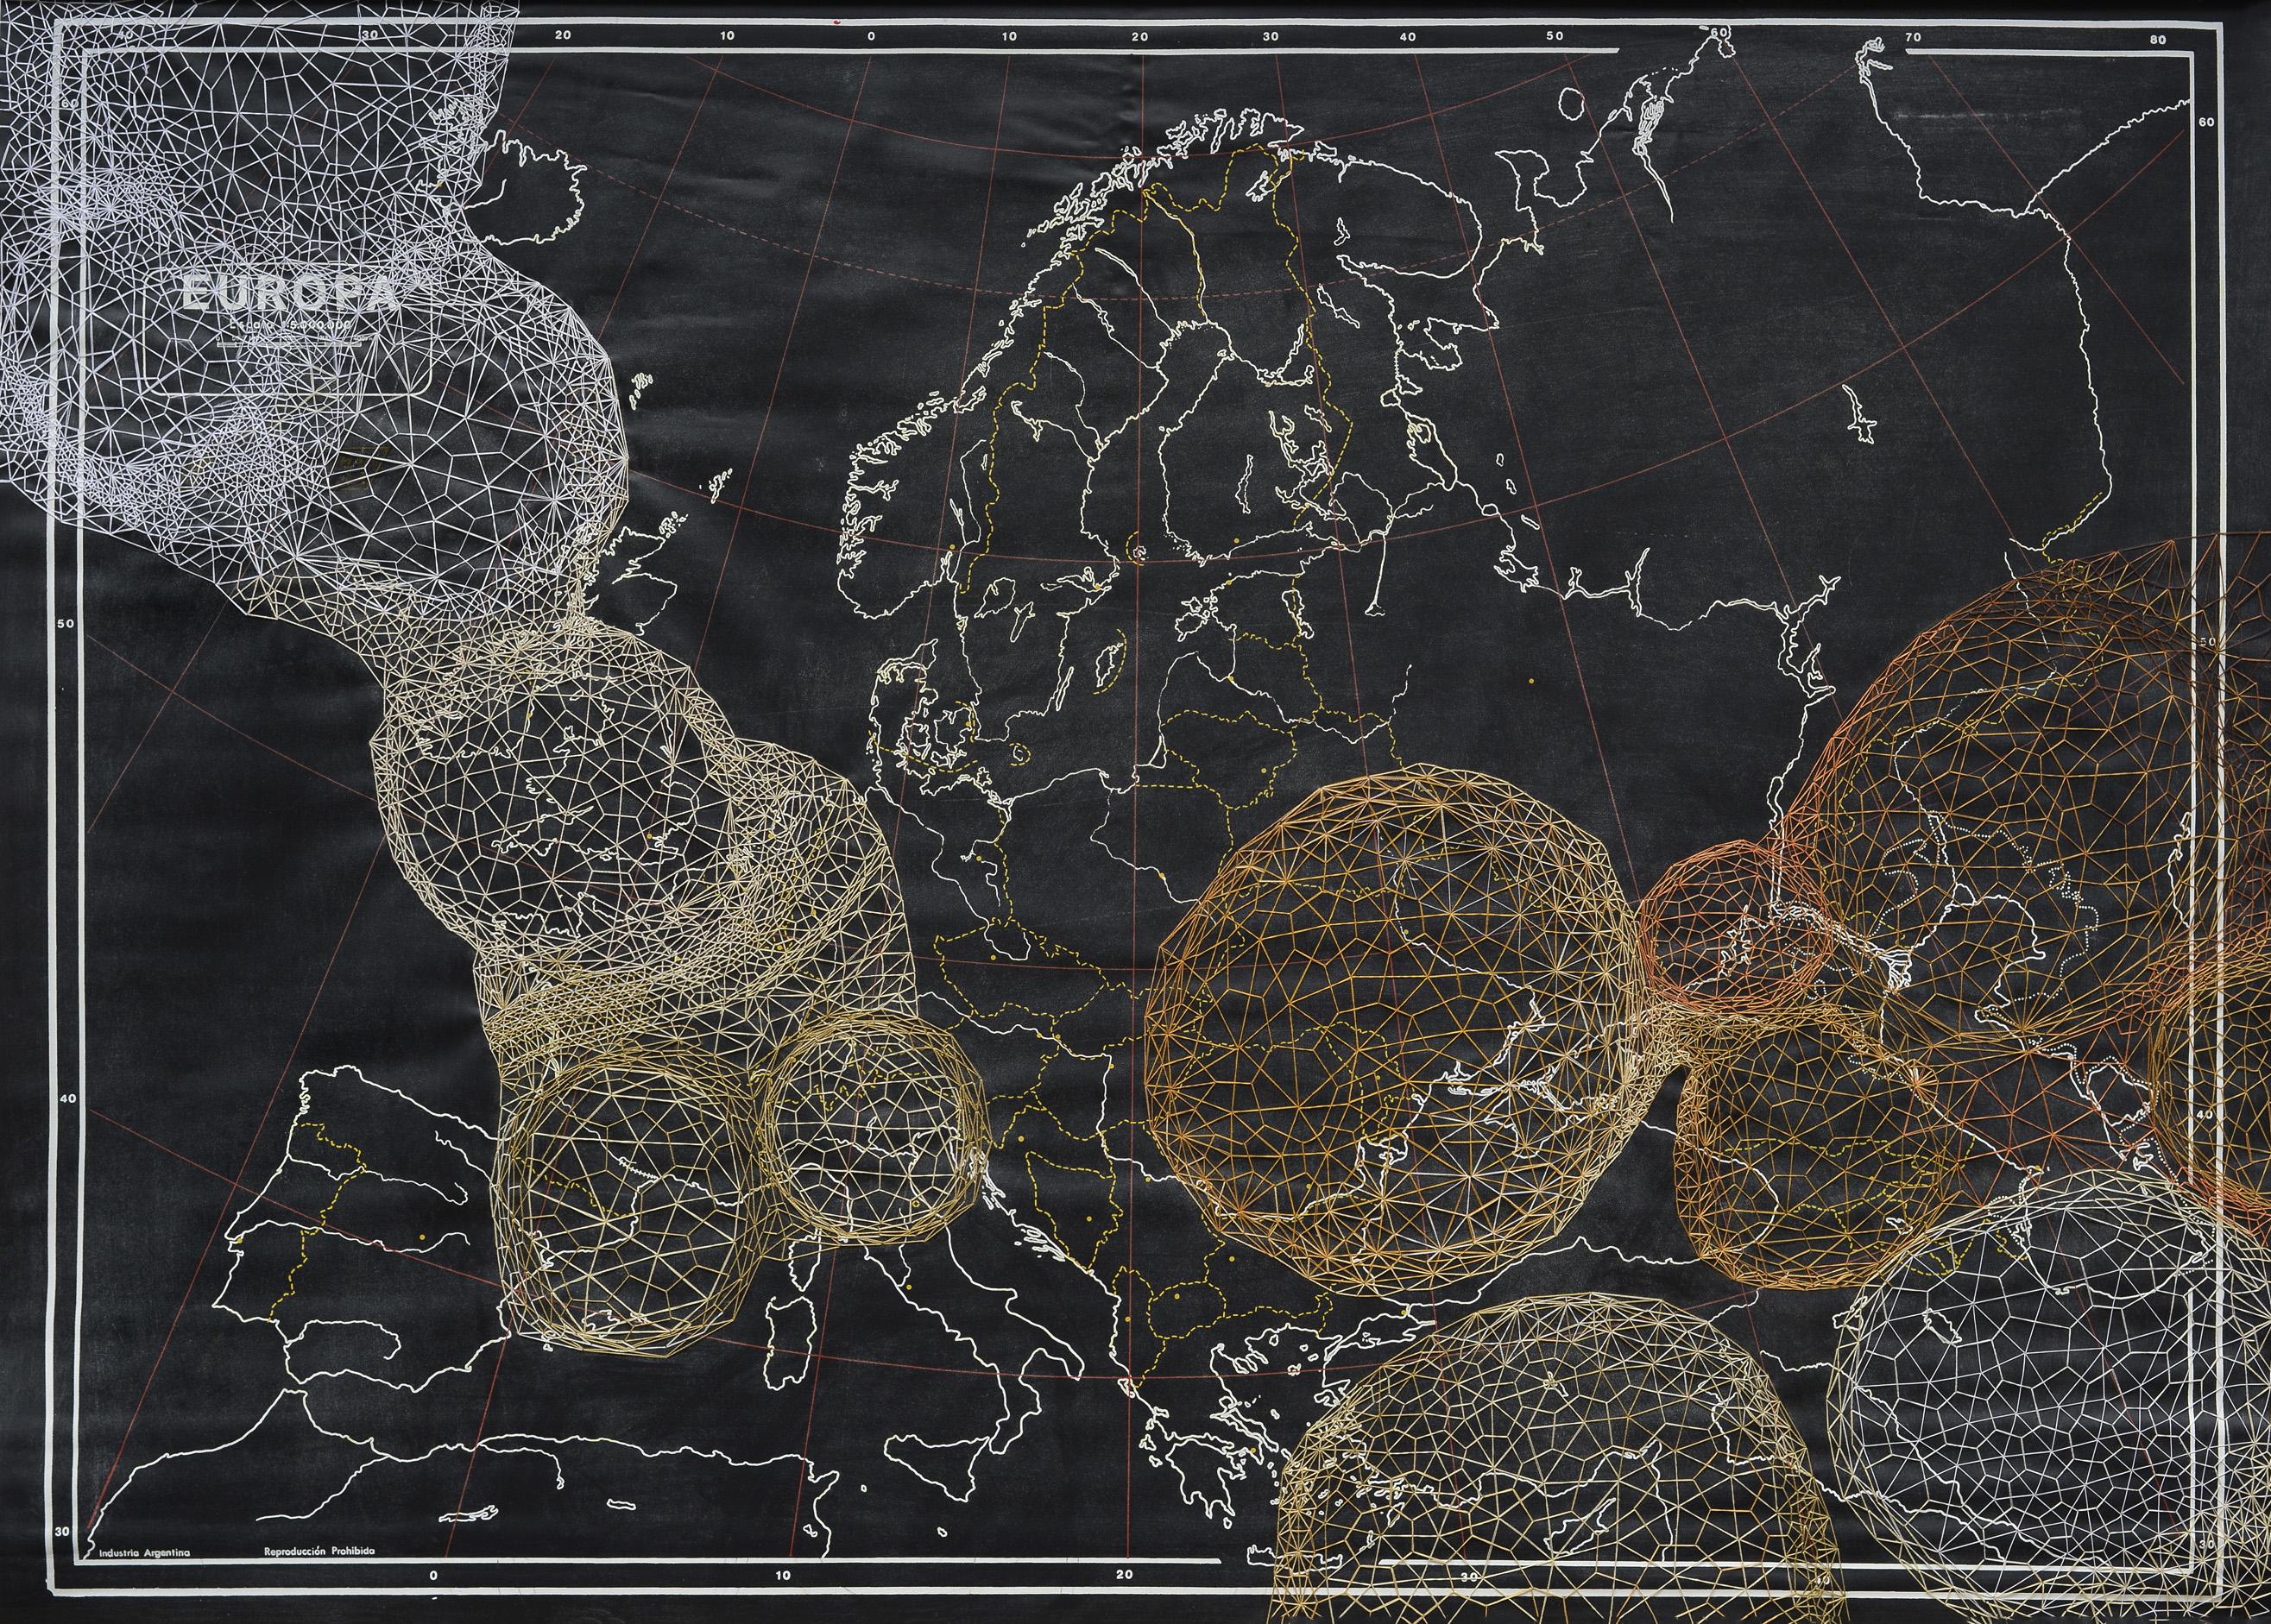 Untitled, Hand Embroidery on map. From the Cartographies series - Art by Ana Seggiaro